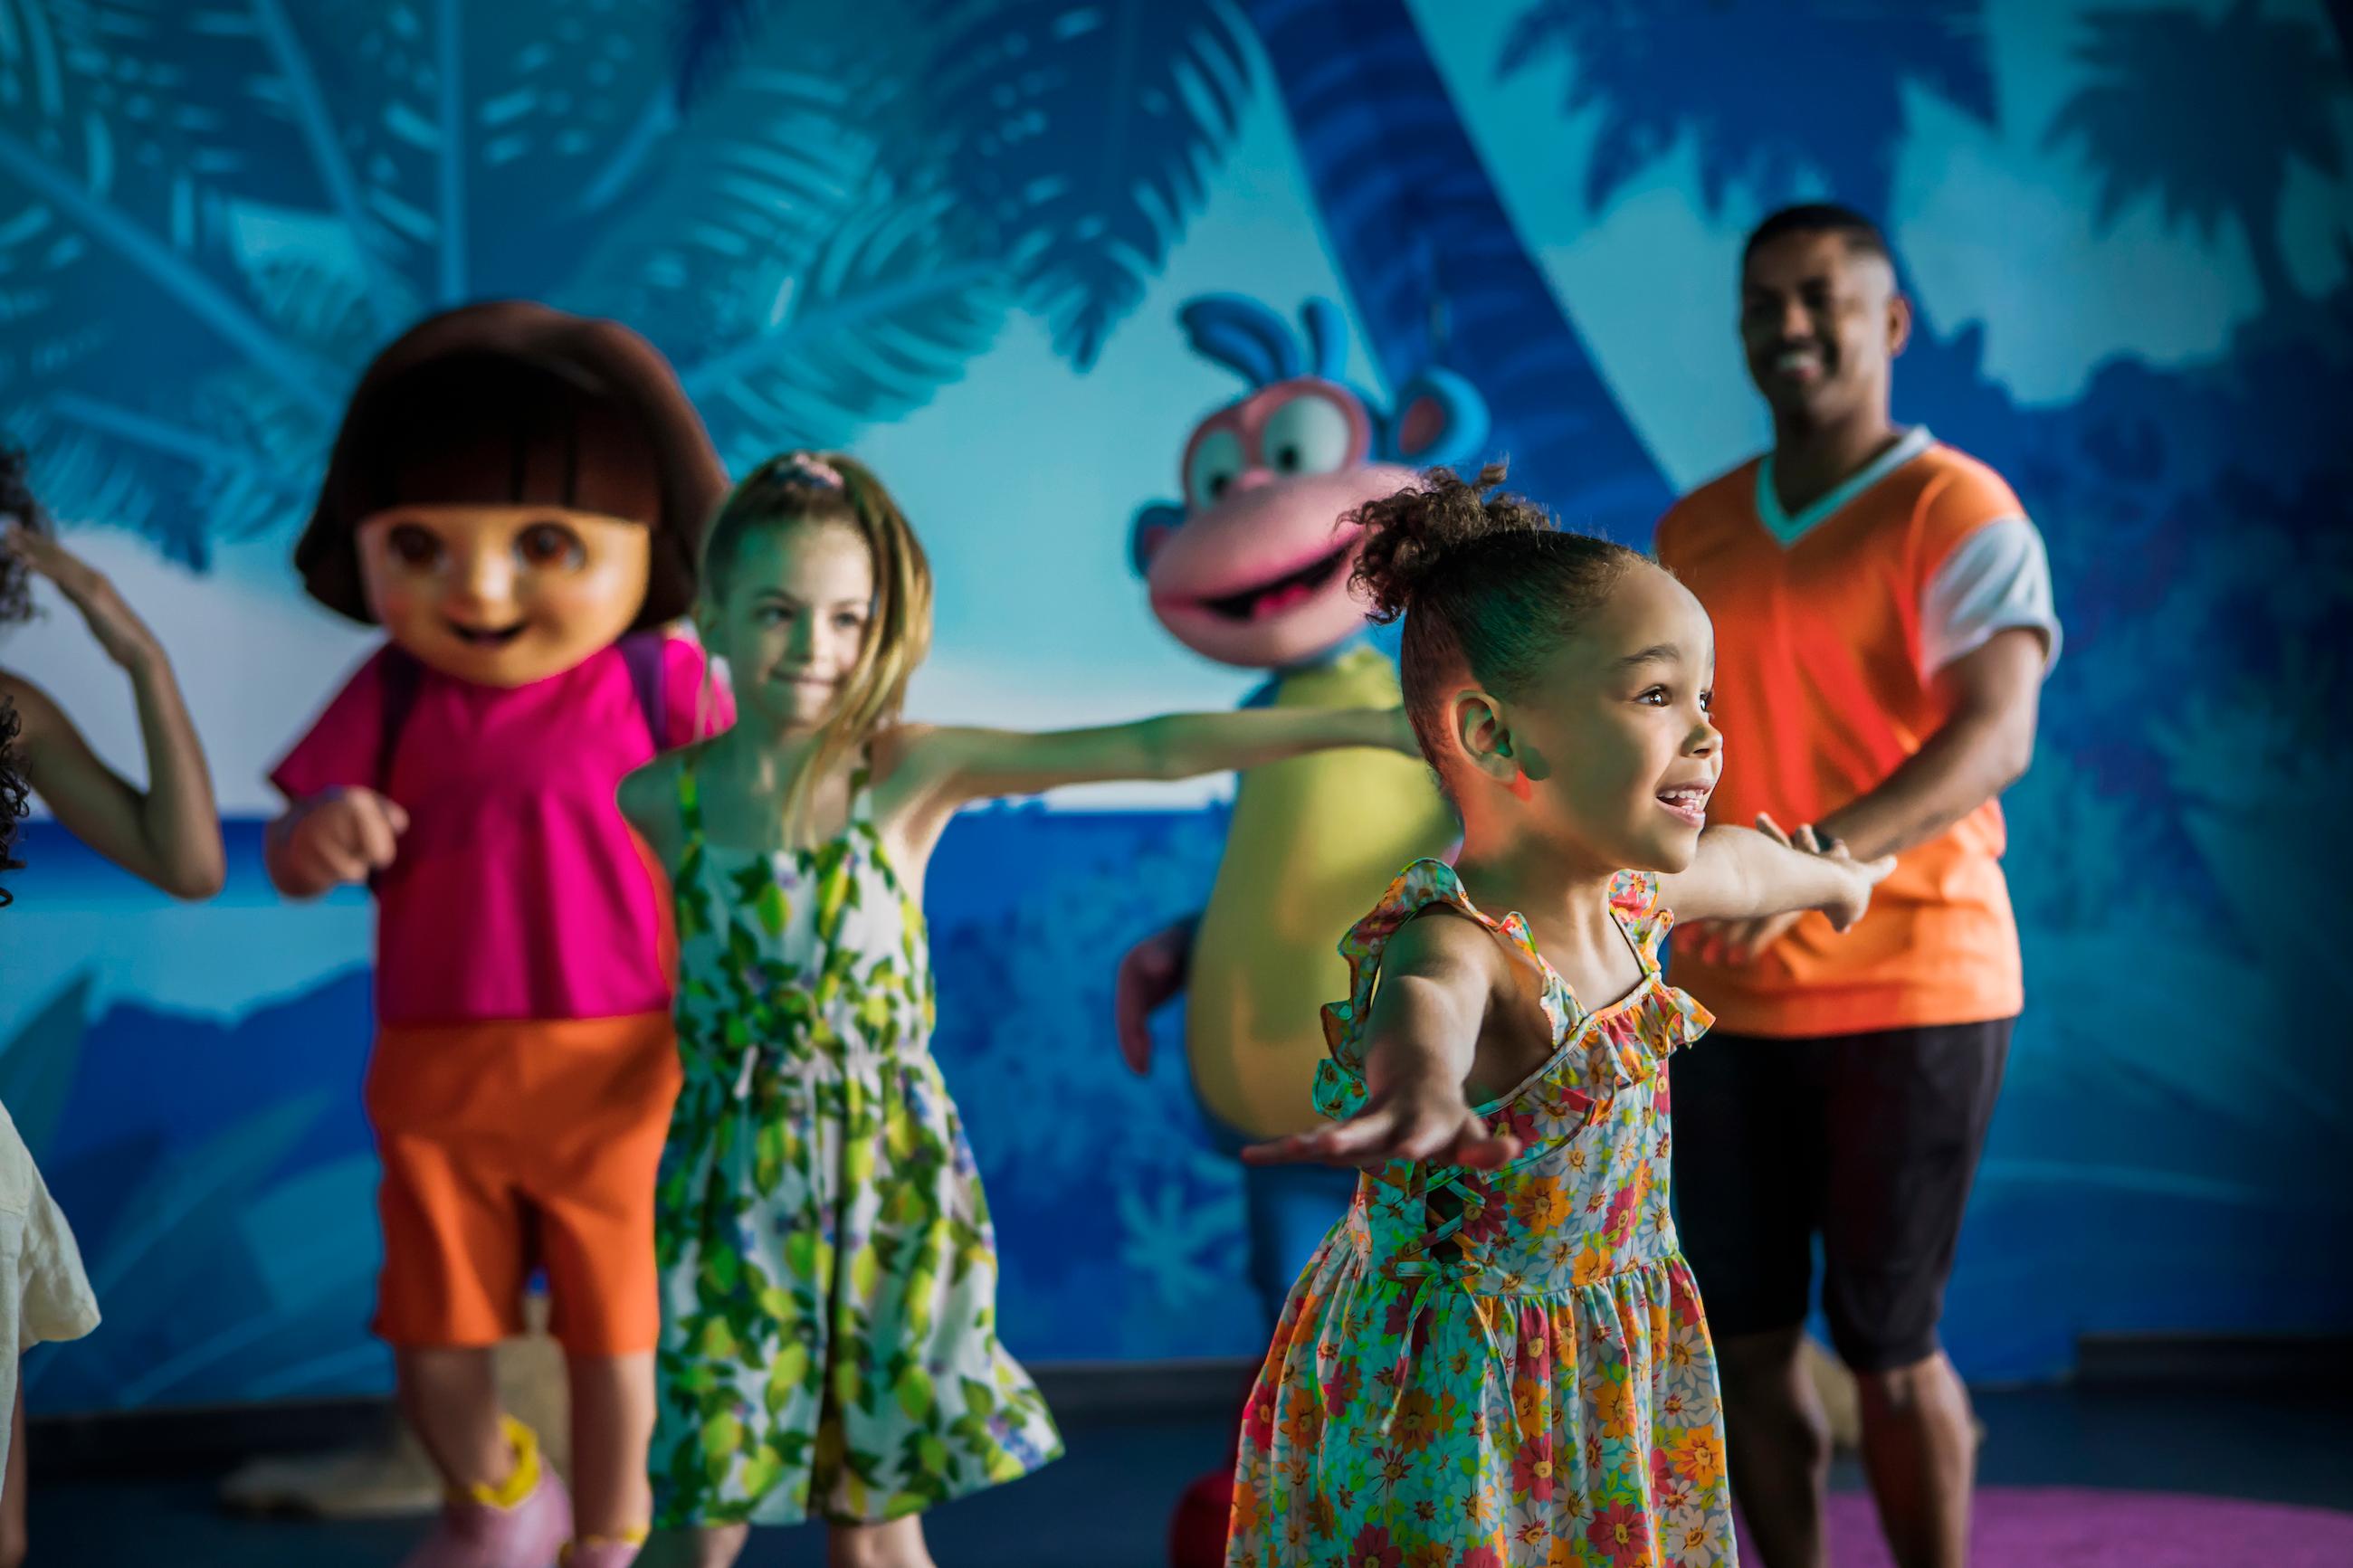 Children have fun dancing with Nickolodeon characters